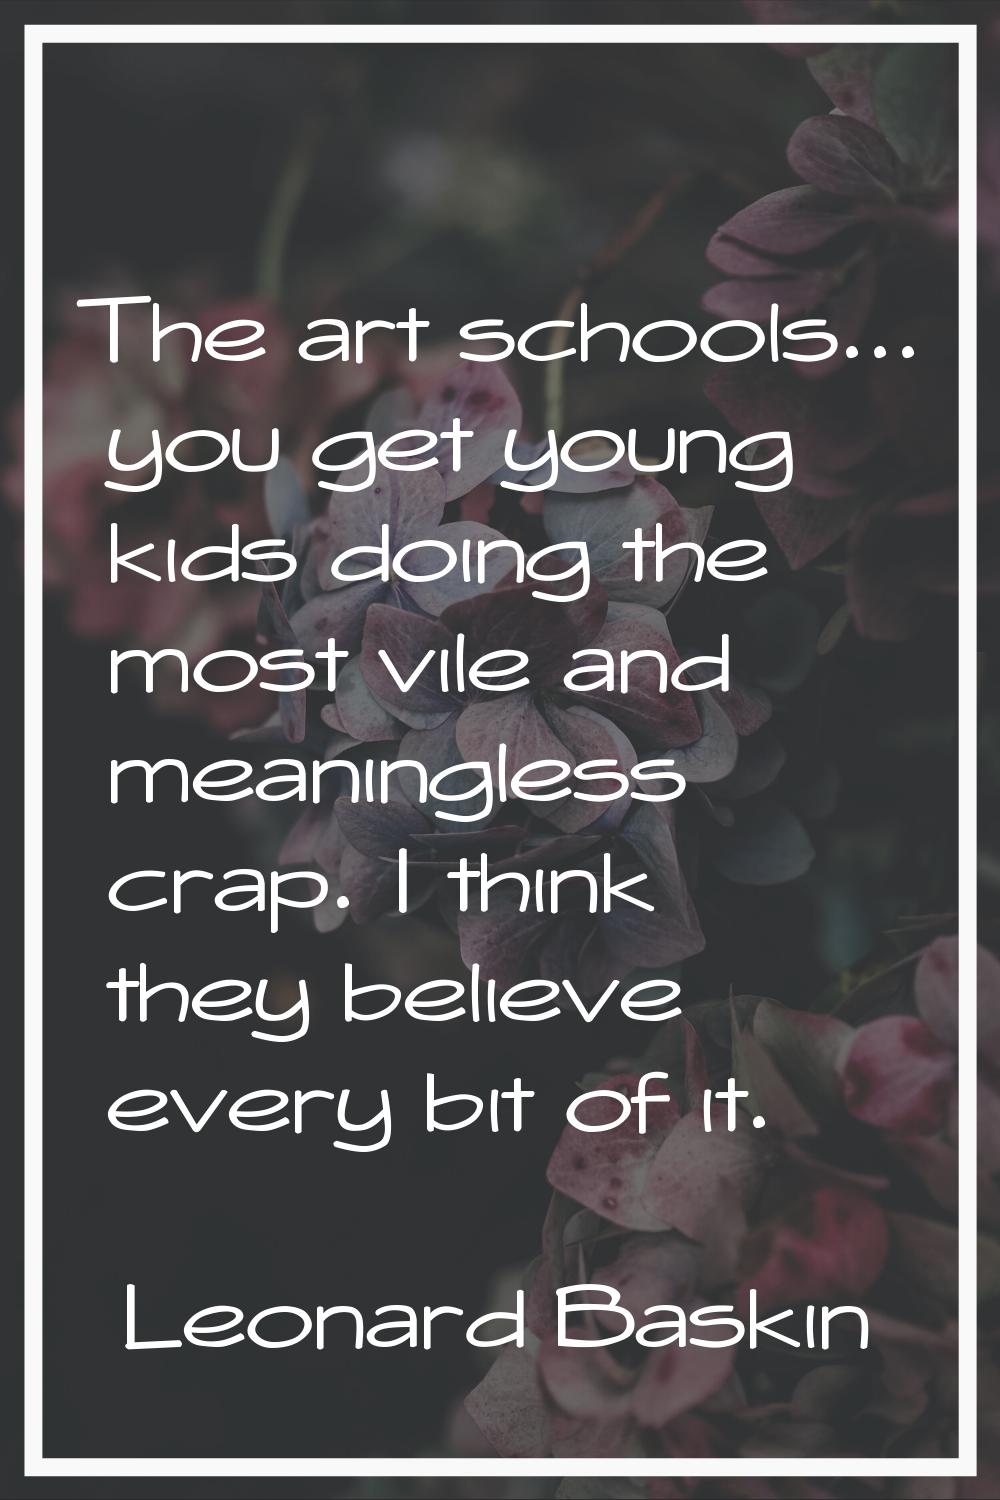 The art schools... you get young kids doing the most vile and meaningless crap. I think they believ